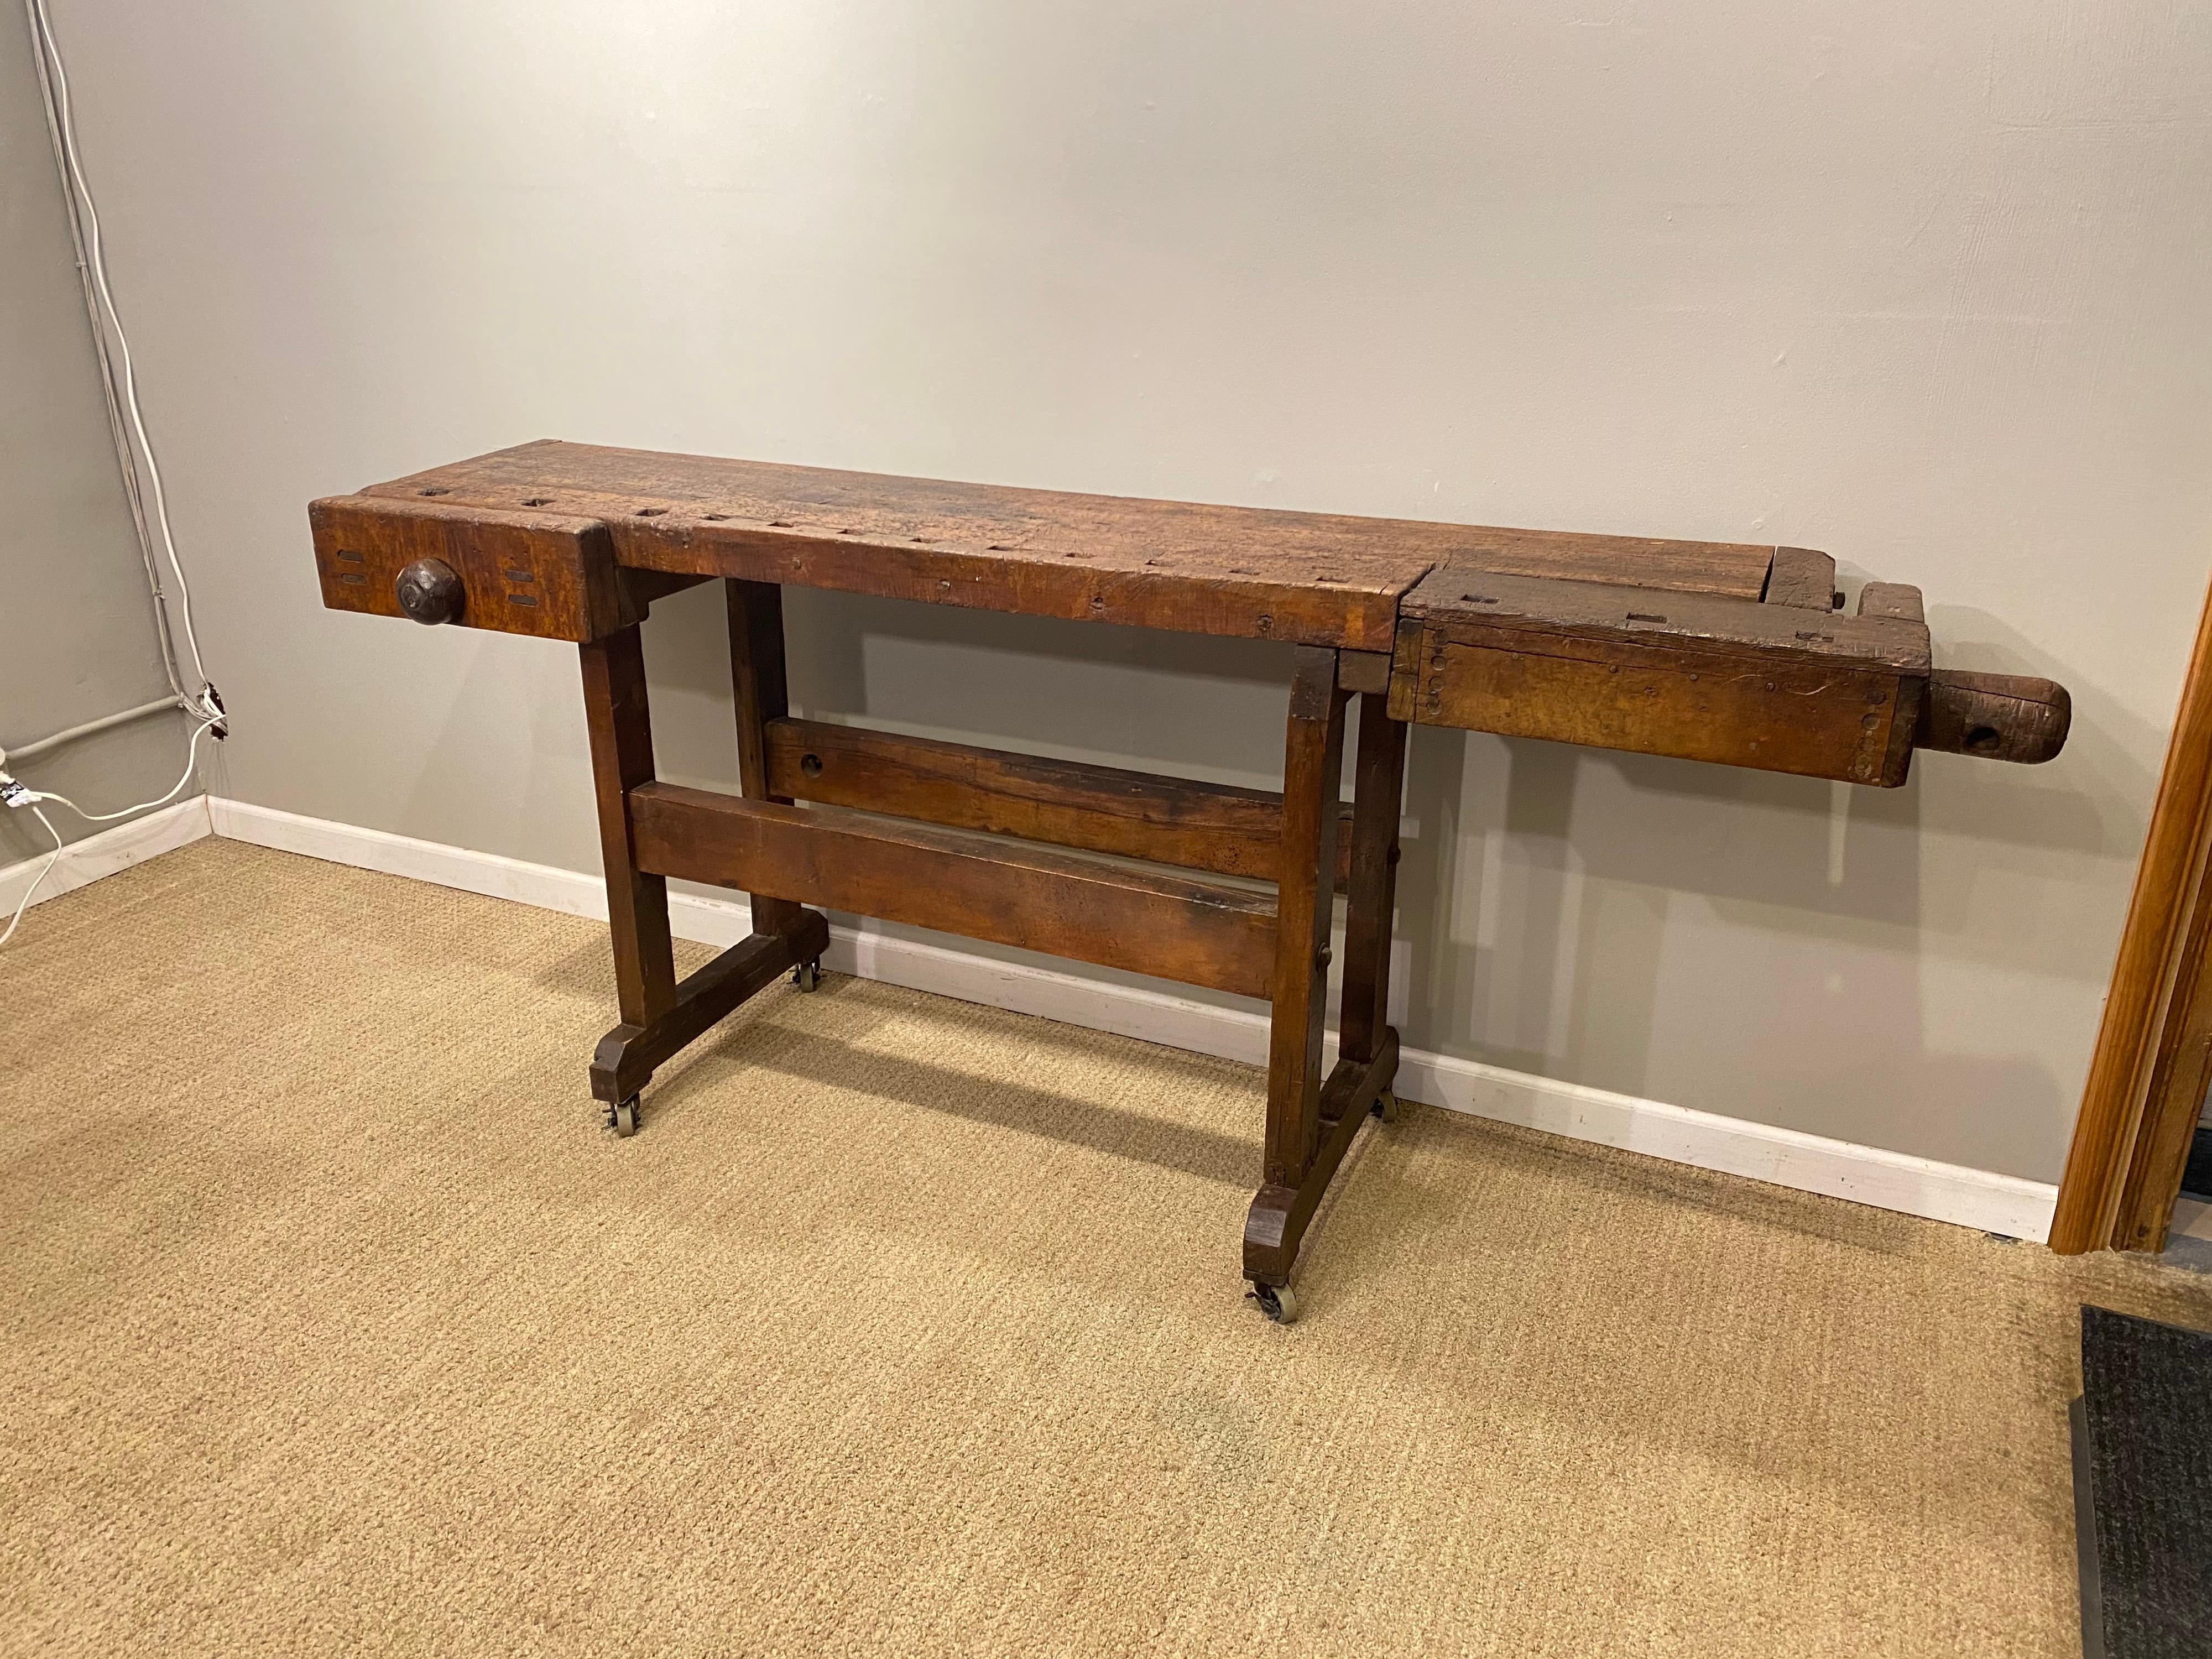 Industrial Cabinet Makers Bench, as Bar, Serving Table or Sideboard